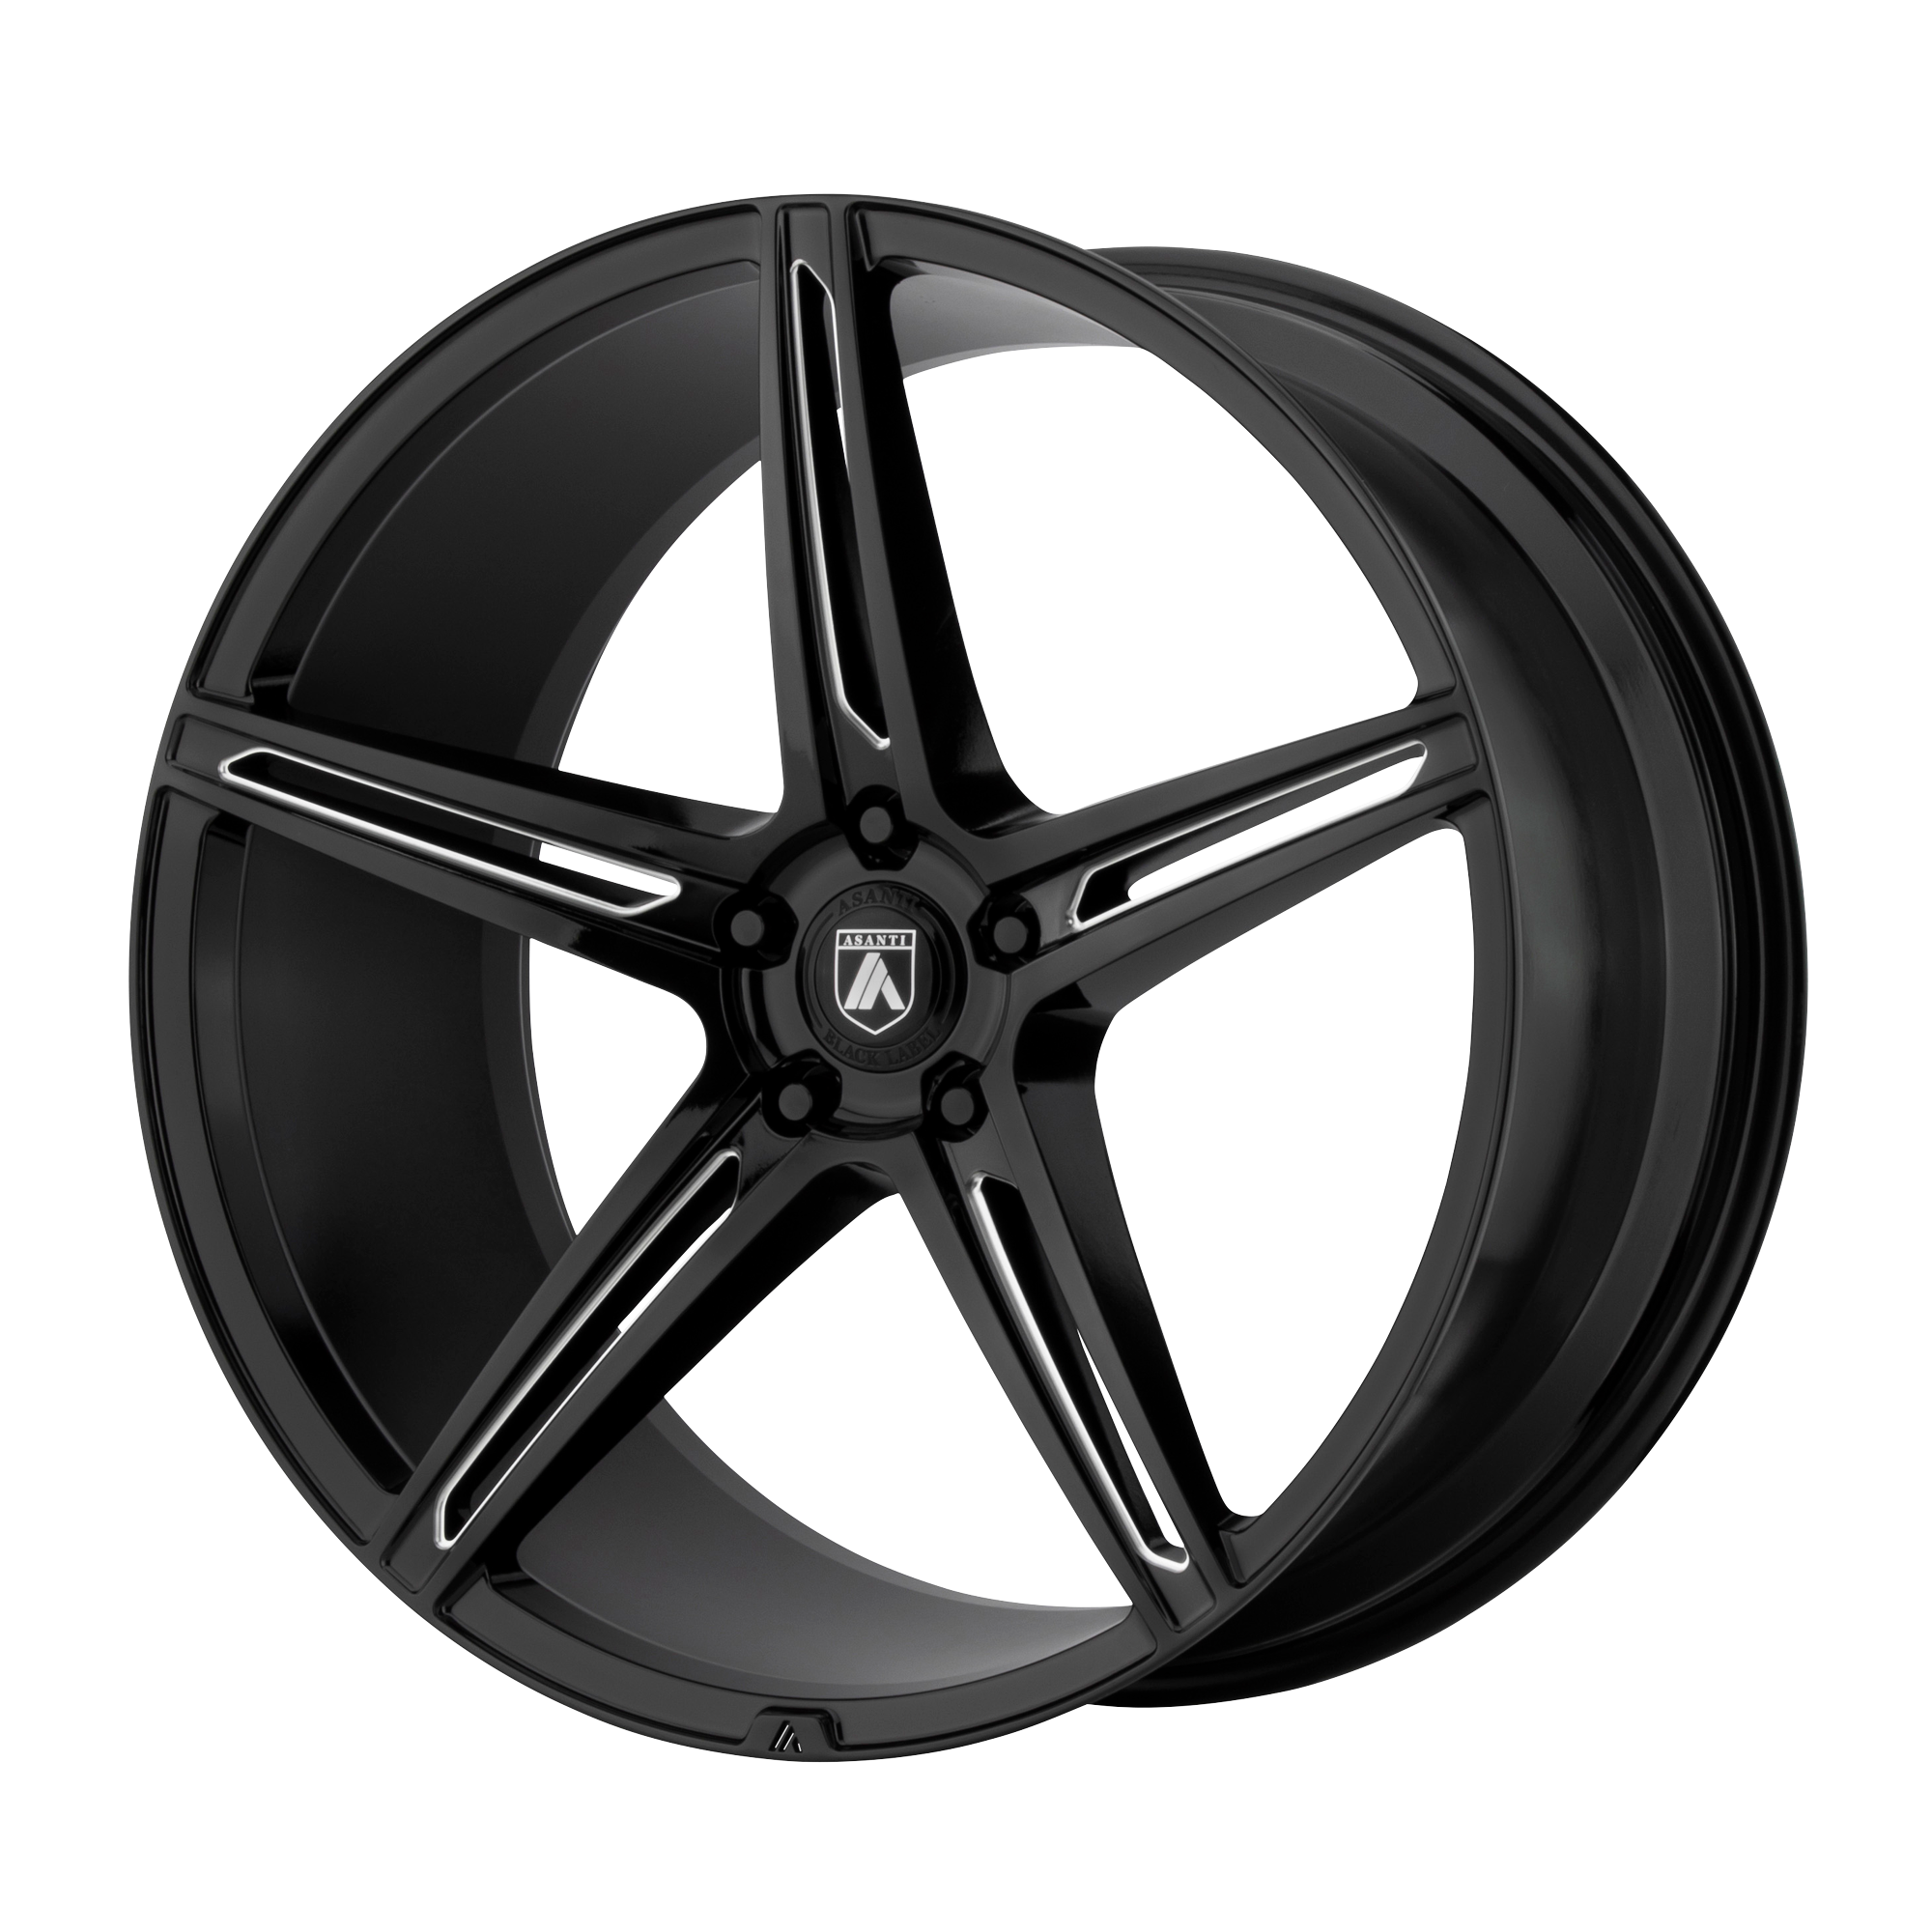 ALPHA 5 22x10.5 5x115.00 GLOSS BLACK MILLED (25 mm) - Tires and Engine Performance